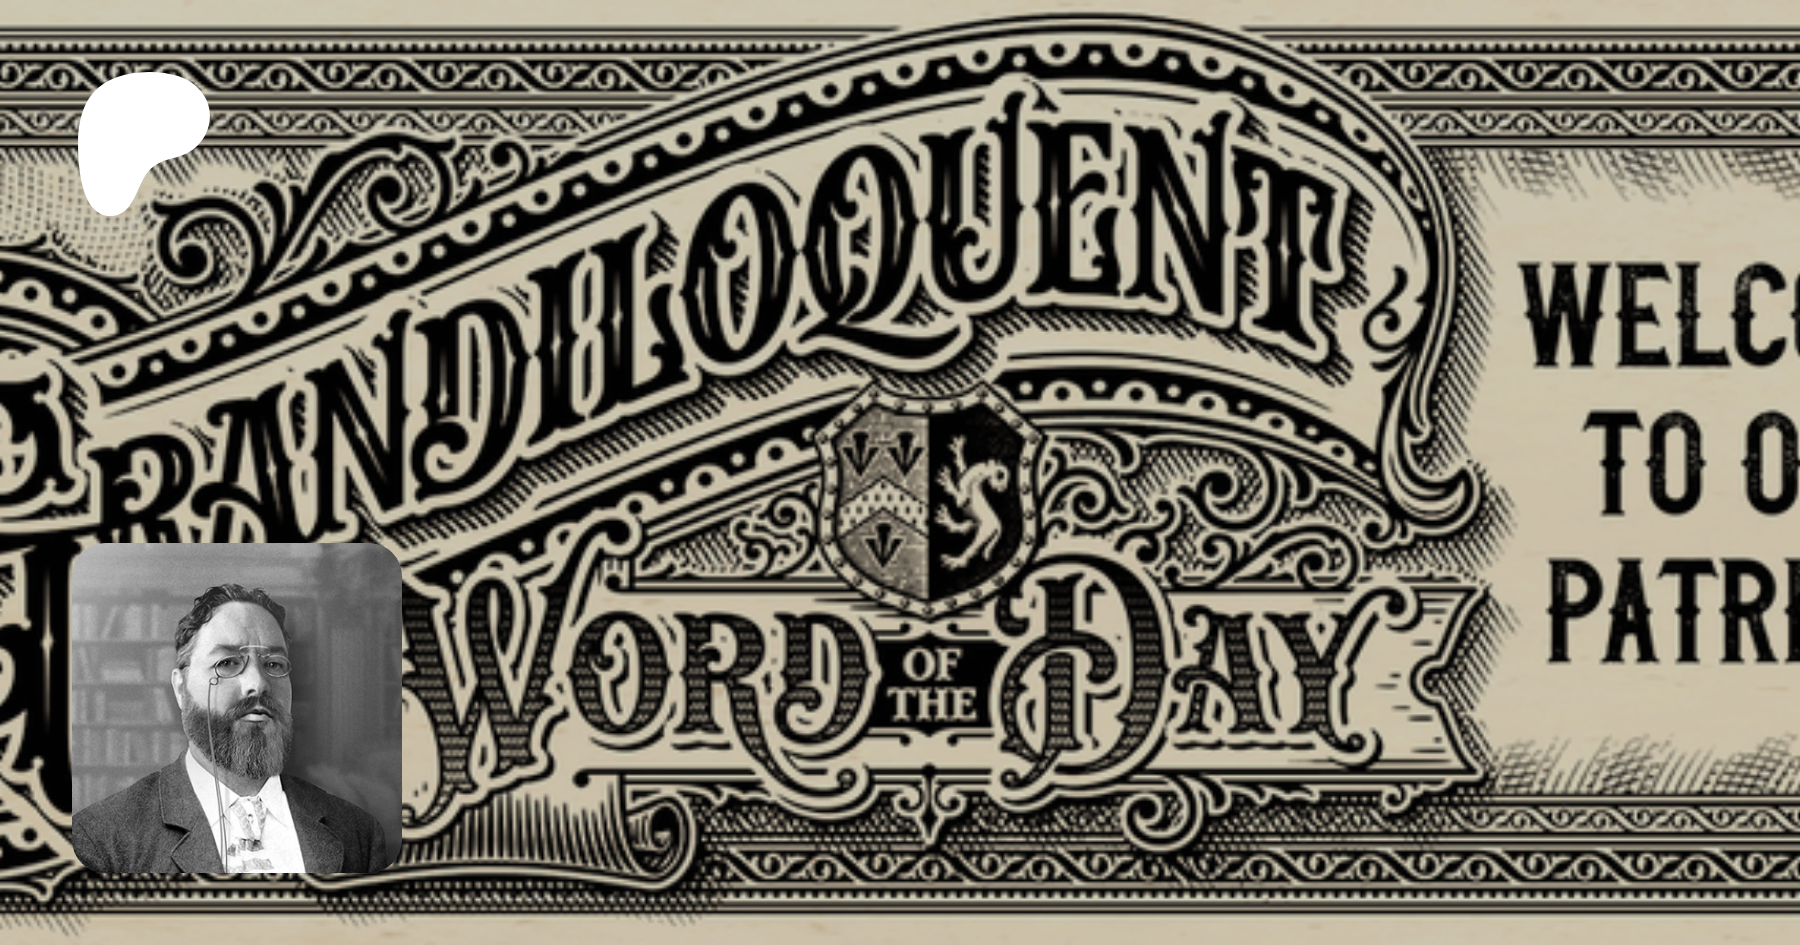 Grandiloquent Word of the Day - Grandiloquent Word of the Day